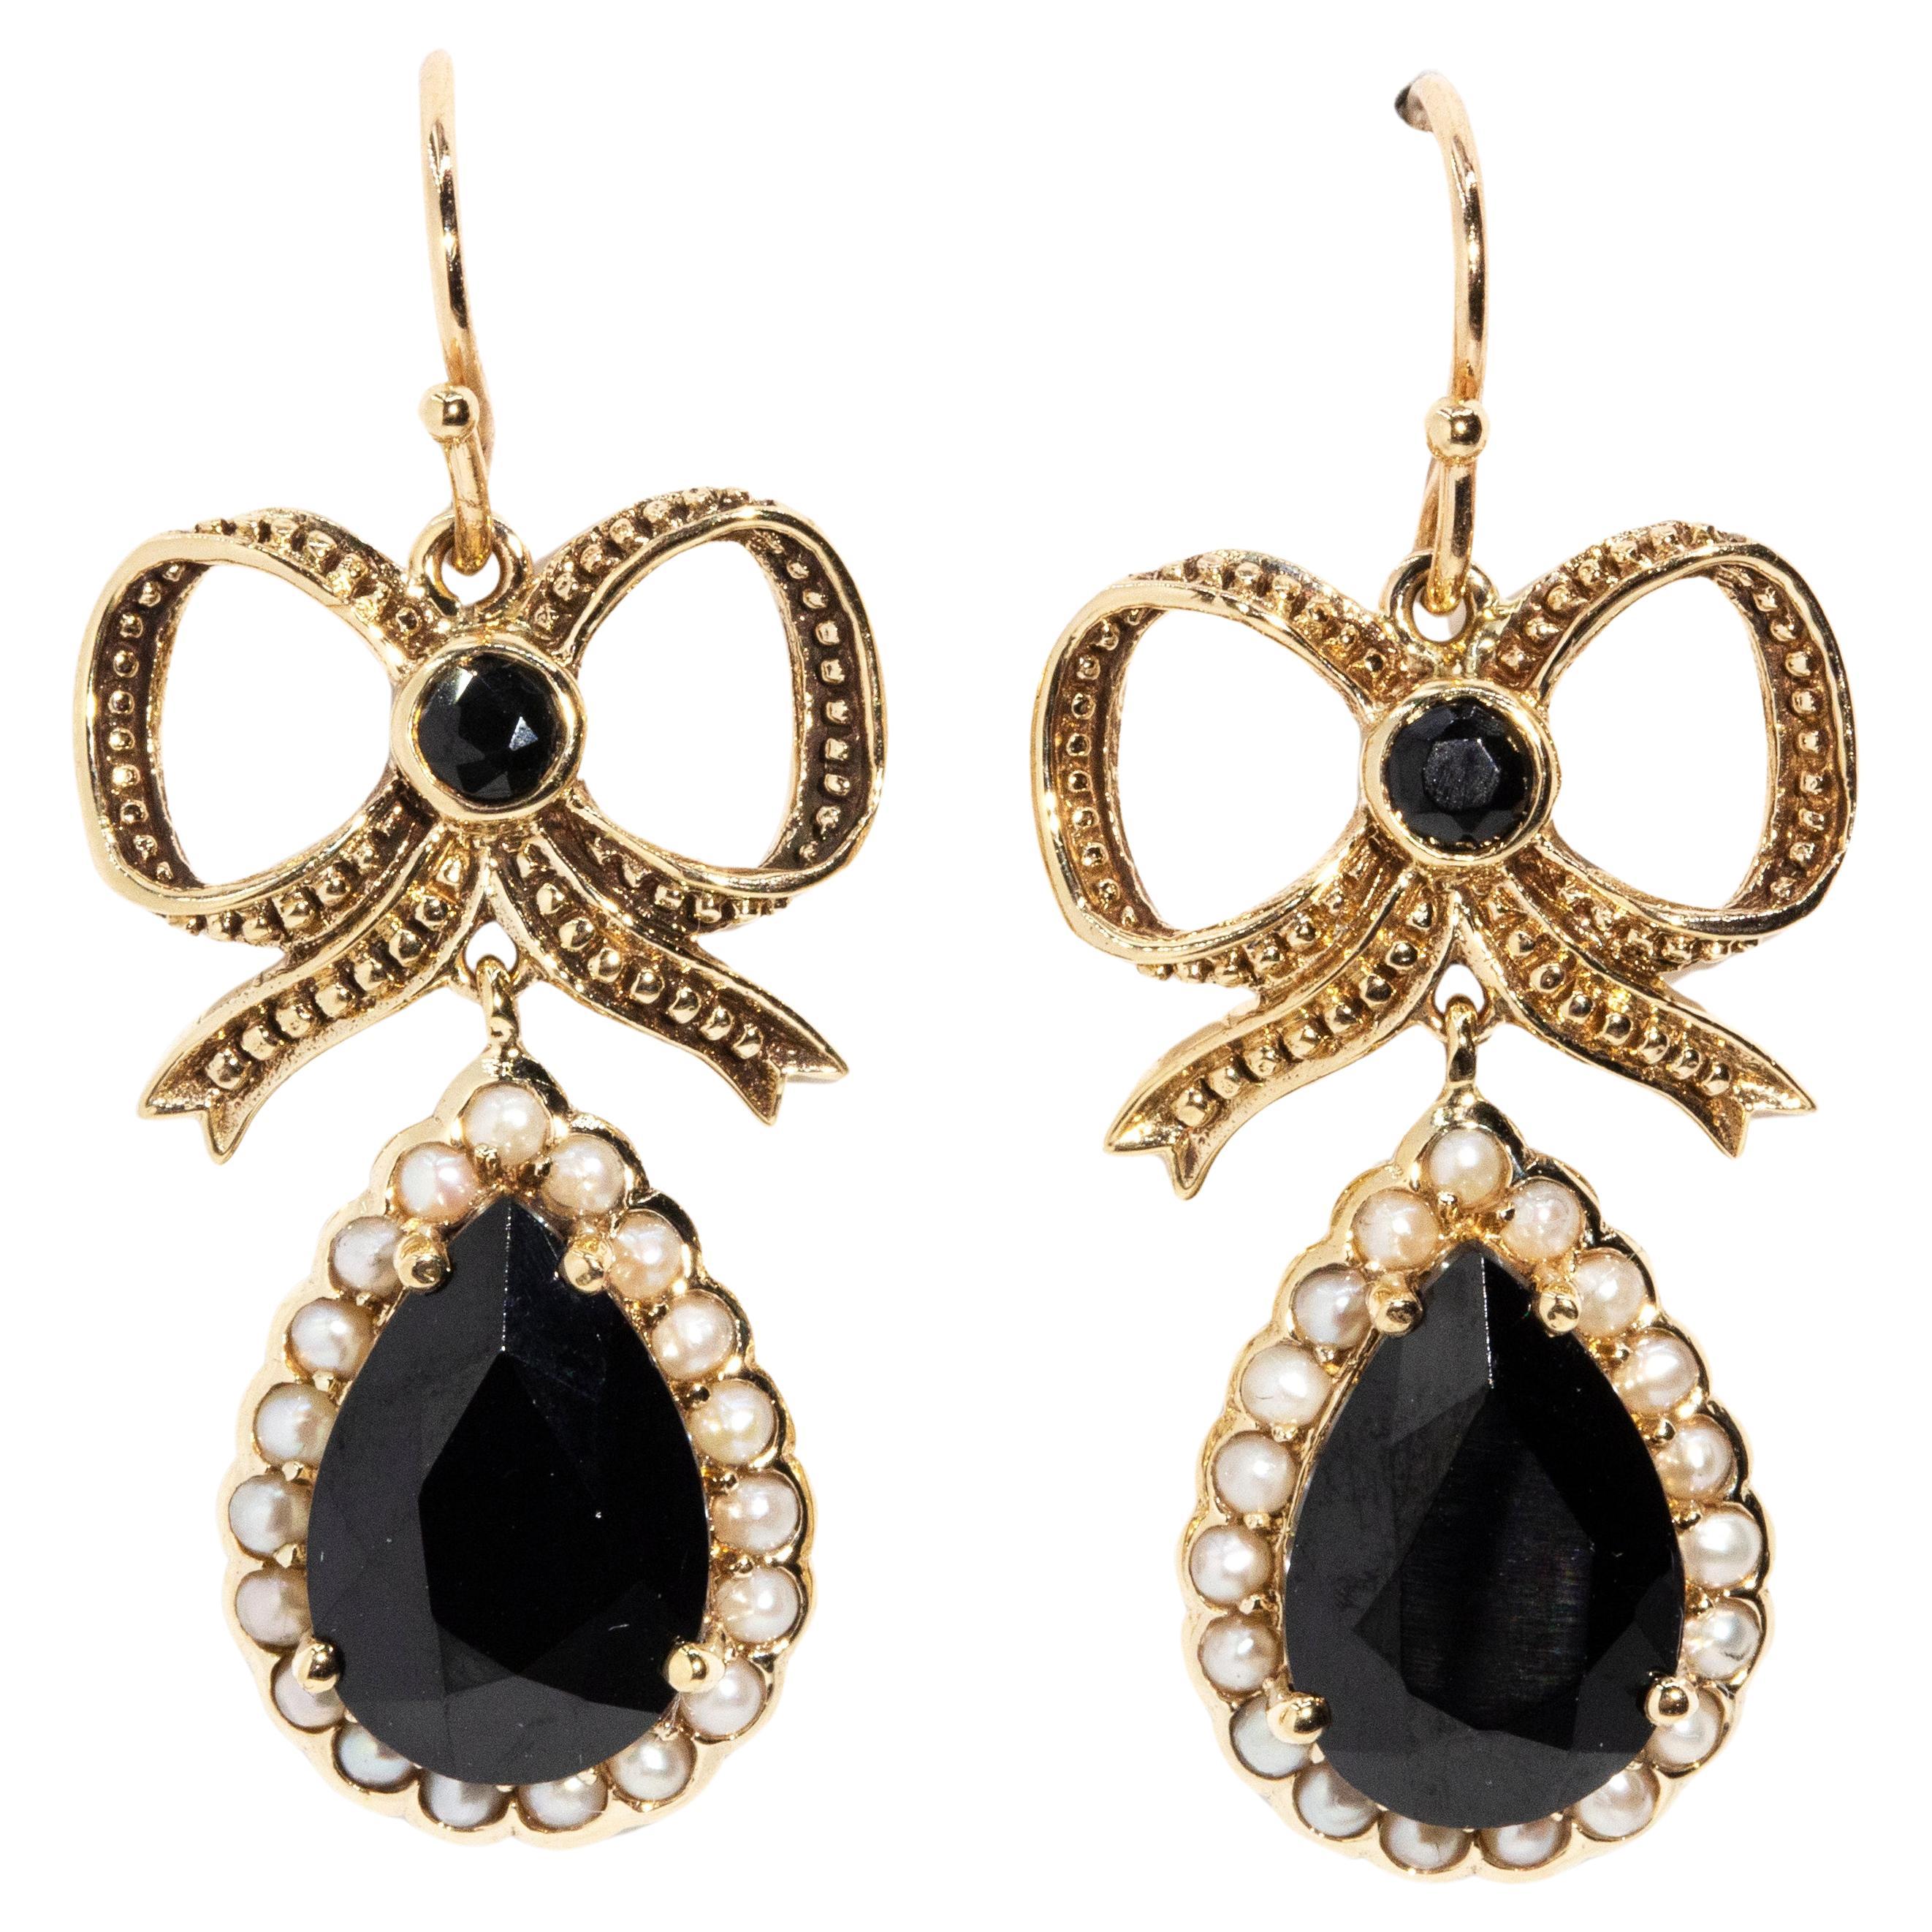 Vintage Inspired Black Onyx & Seed Pearl Bow Drop Earrings 9 Carat Yellow Gold